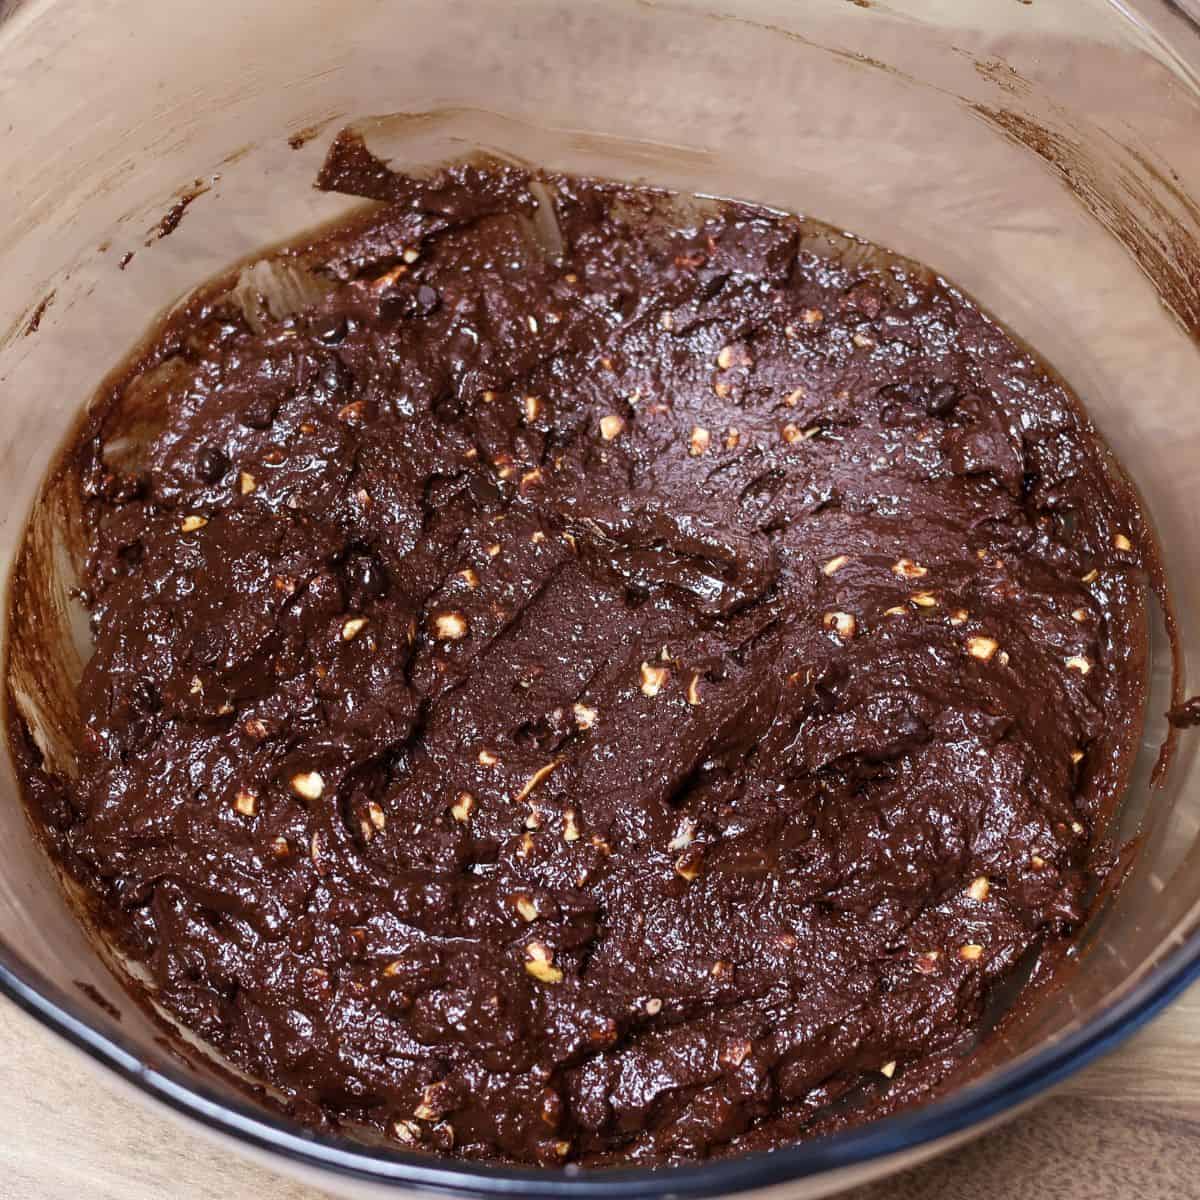 Thick, glossy brownie batter in a glass mixing bowl with nuts and chocolate chips folded in, ready for baking.